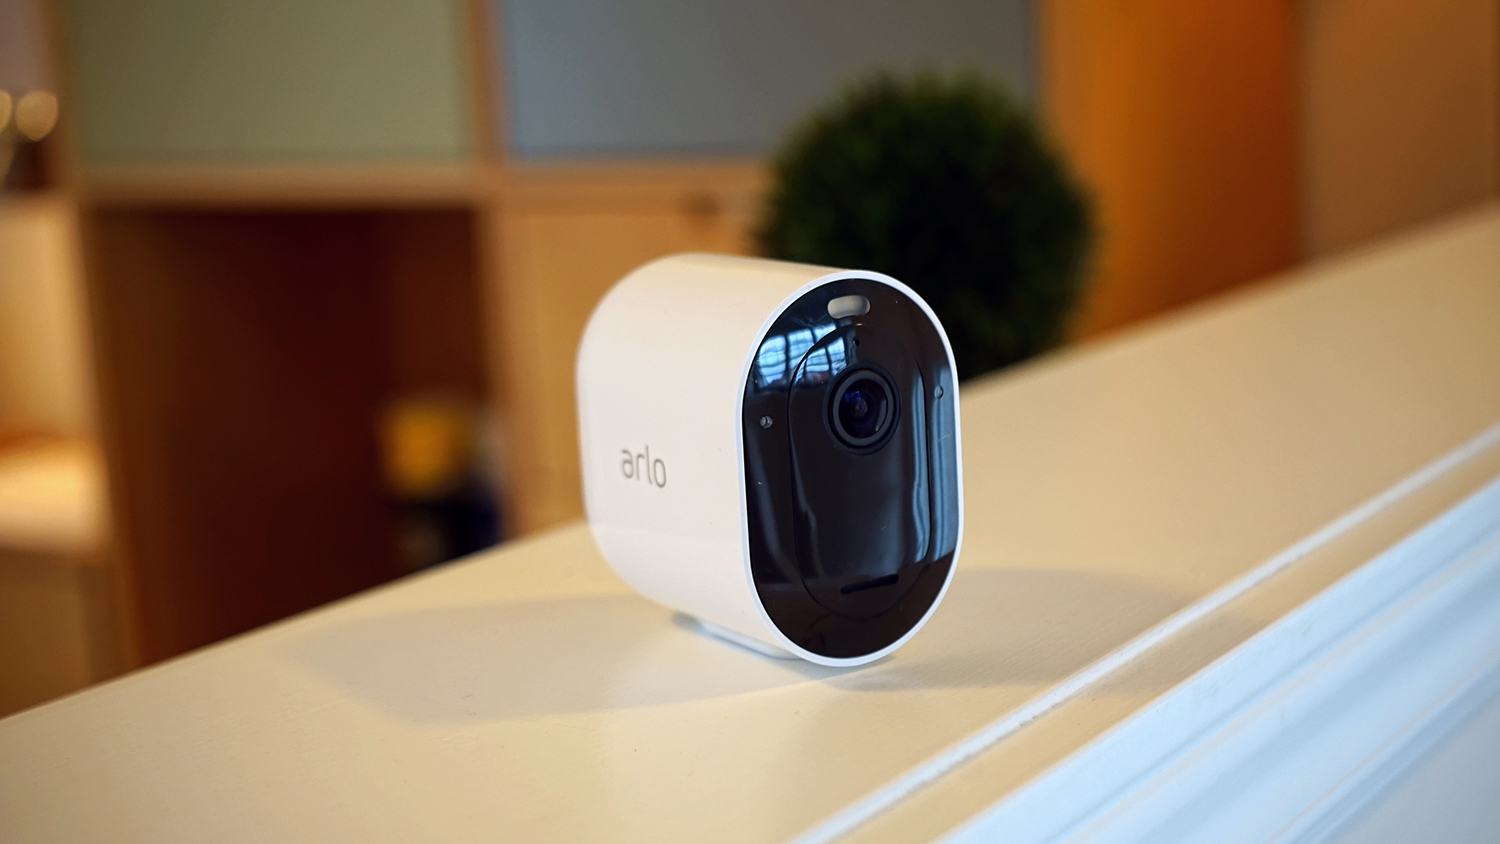 Arlo Pro 3 Review: A Great Choice For Smart Home Security